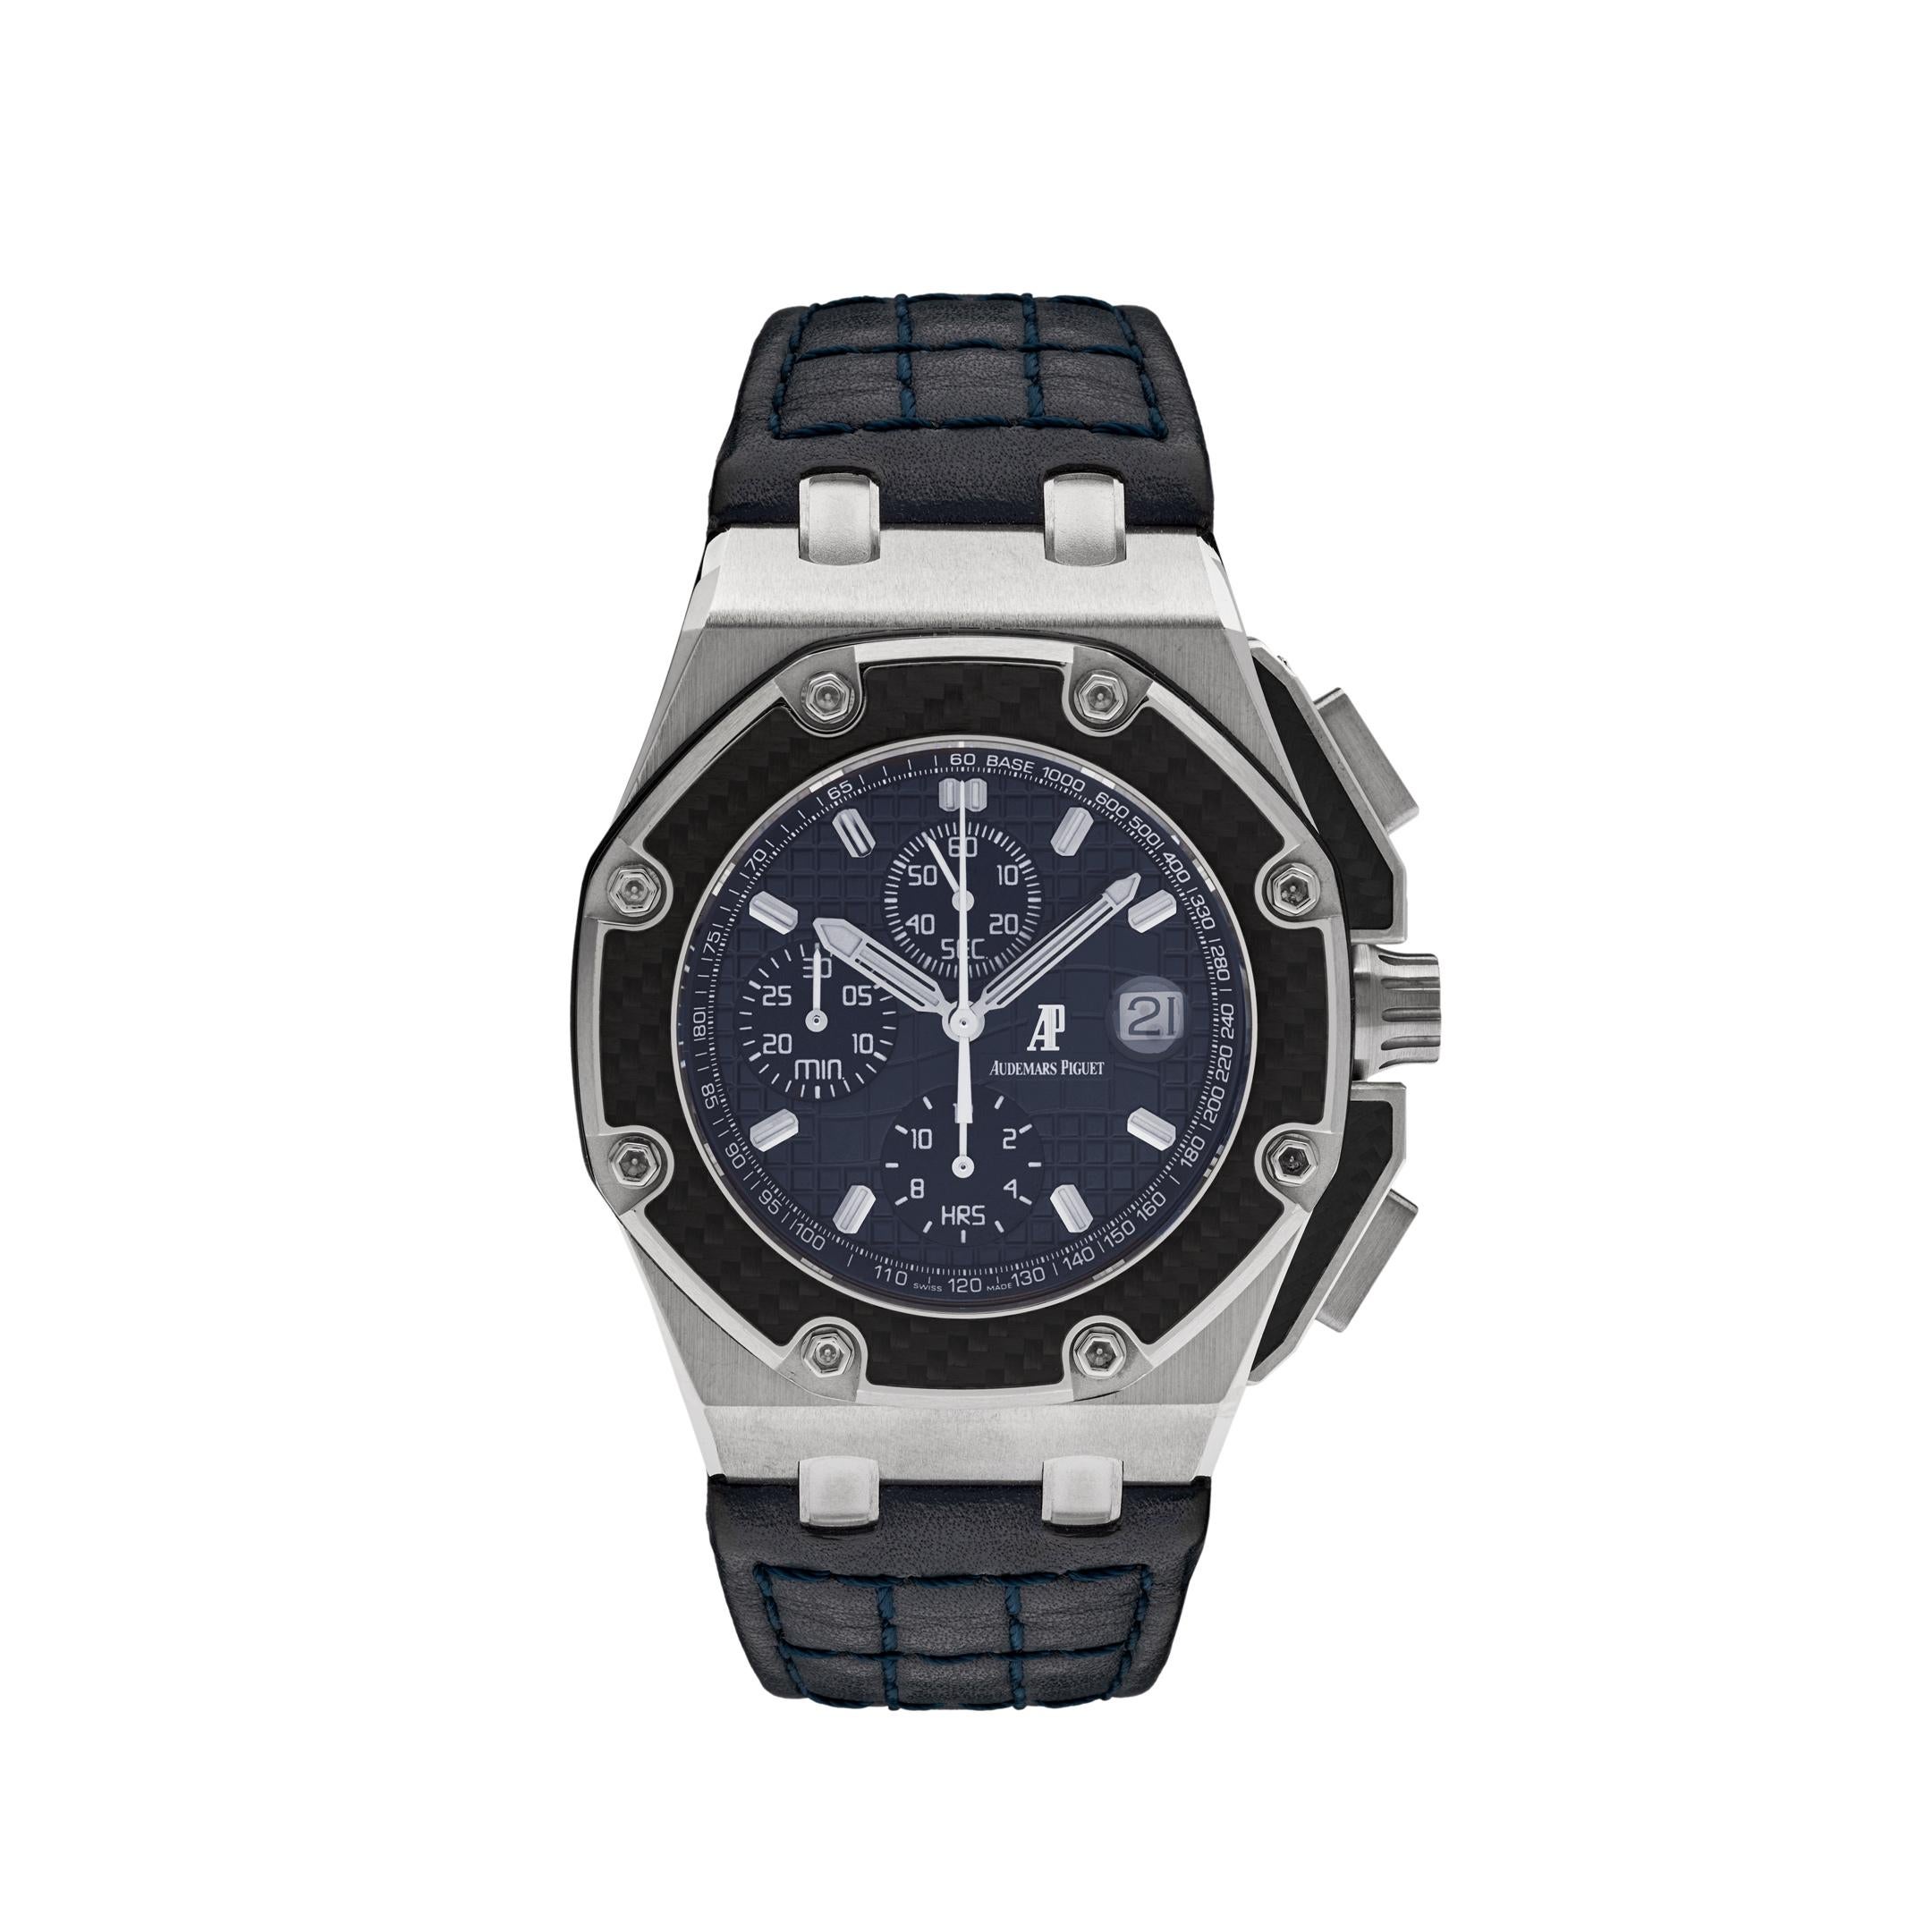 The Audemars Piguet Royal Oak Offshore is inspired by the world of Formula 1 motor racing, the brand partnered with F1 driver, Juan Pablo Montoya, to design a limited edition unique masterpiece. This watch features a 42mm platinum case, while the